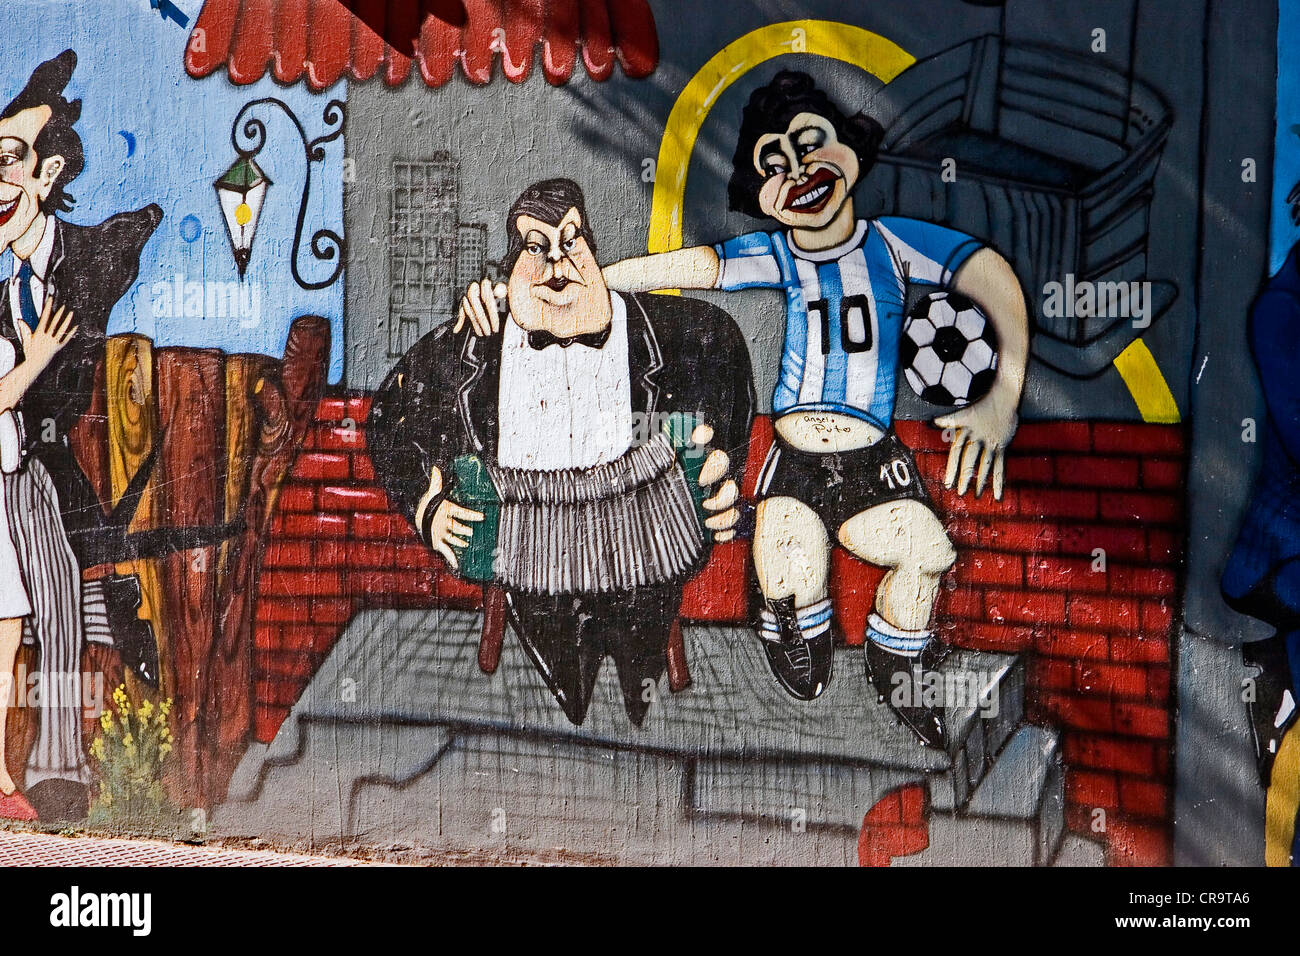 A mural ( street art) of Diego Maradona in the La Boca district of Buenos Aires, Argentina. Stock Photo